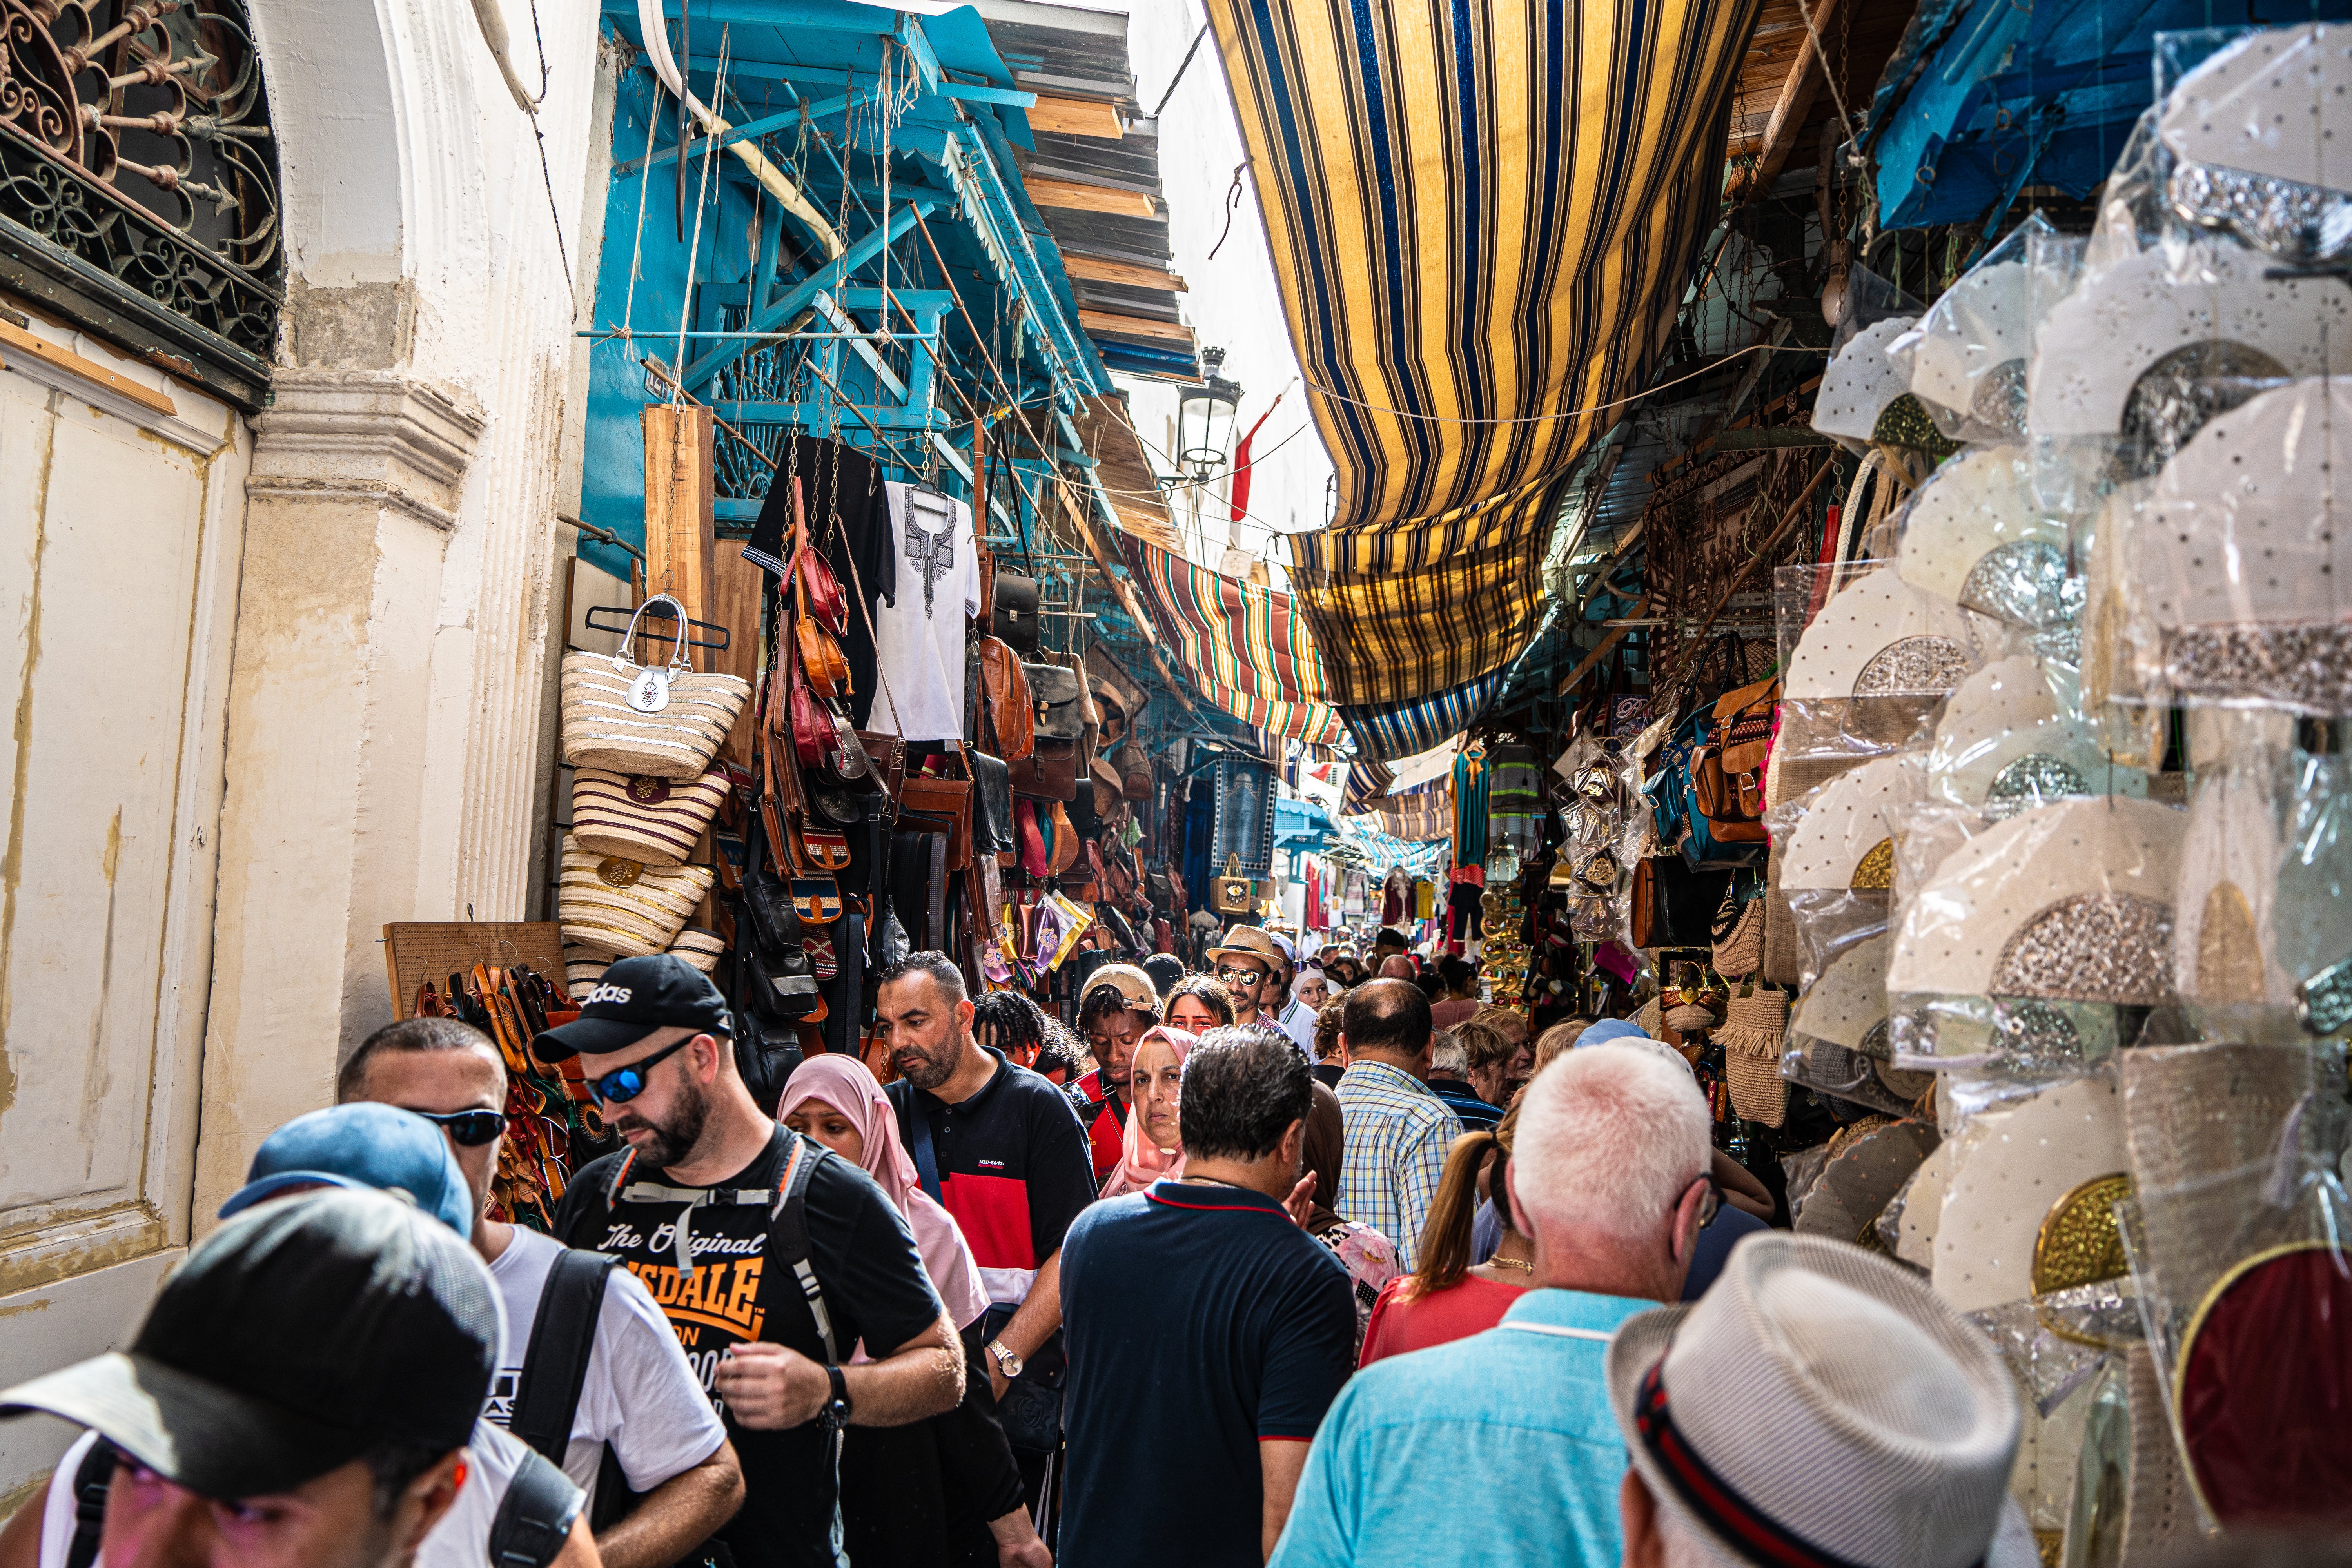 A labyrinth of ancient alleyways is primed for hagglers in the Tunis medina